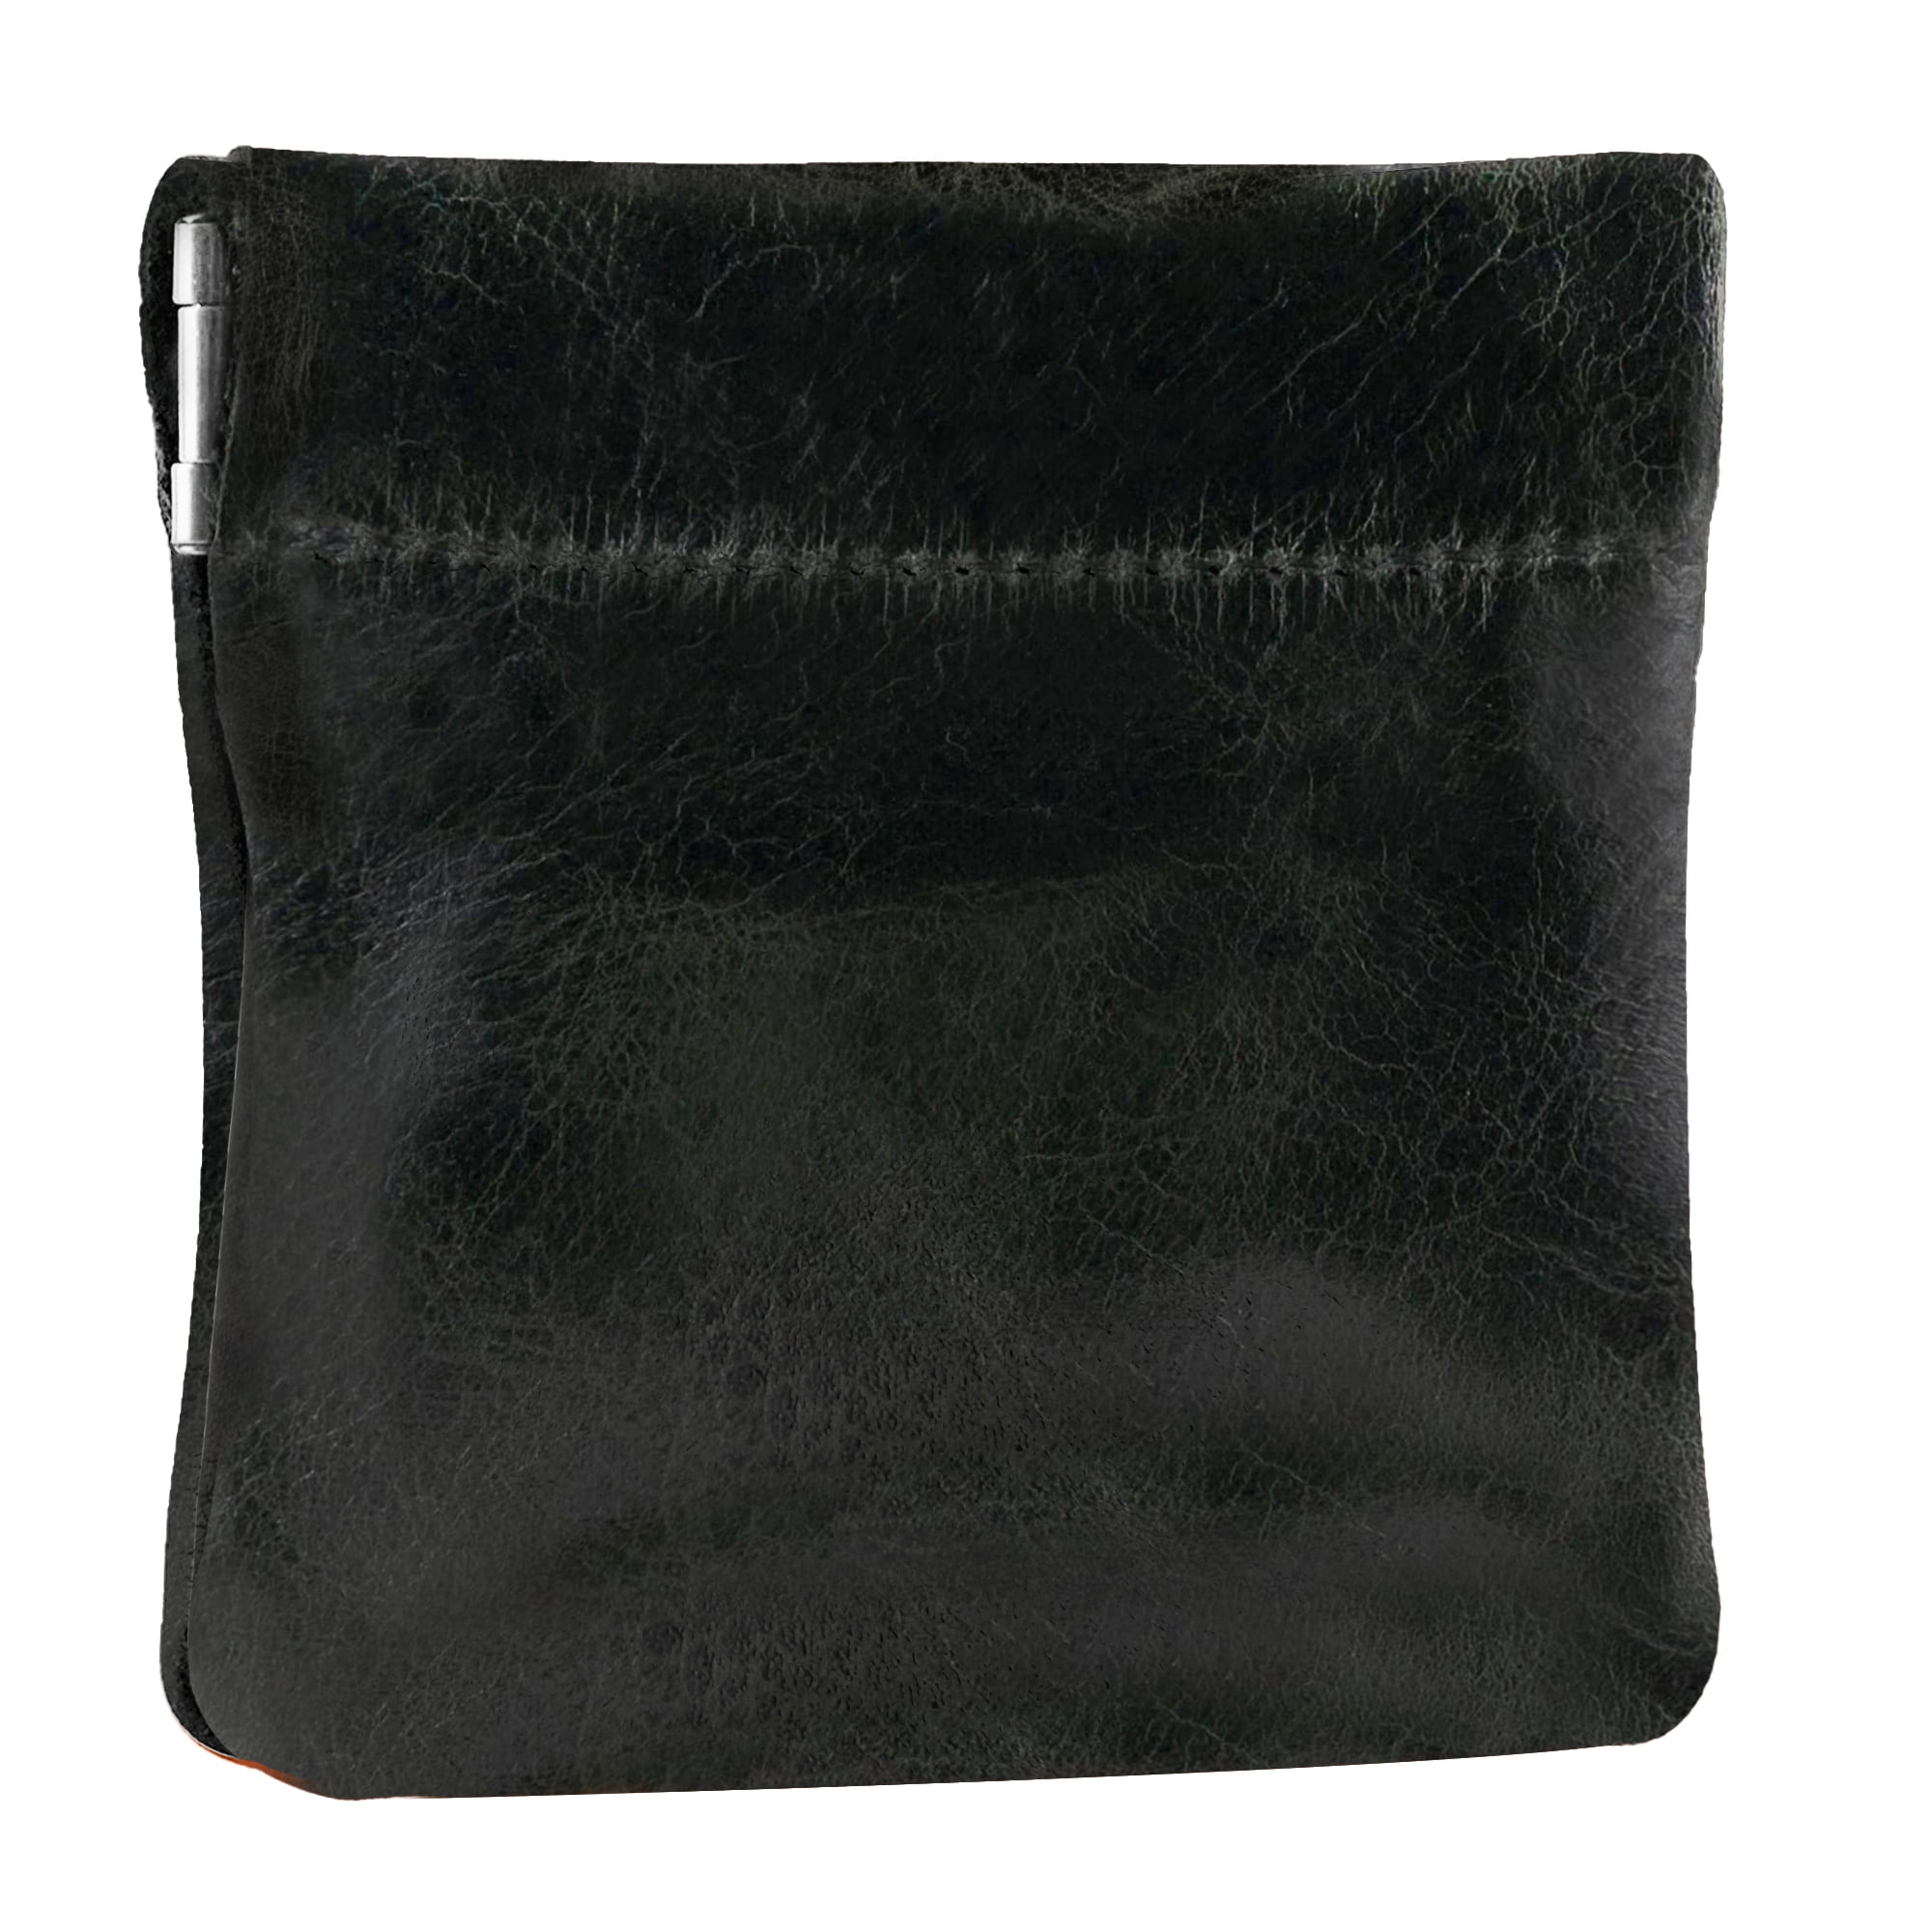 Nabob Leather Genuine Leather Squeeze Coin Purse, Pouch Made IN U.S.A. Change  Holder For Men/Woman Size 3.5 X 3.5 - Walmart.com